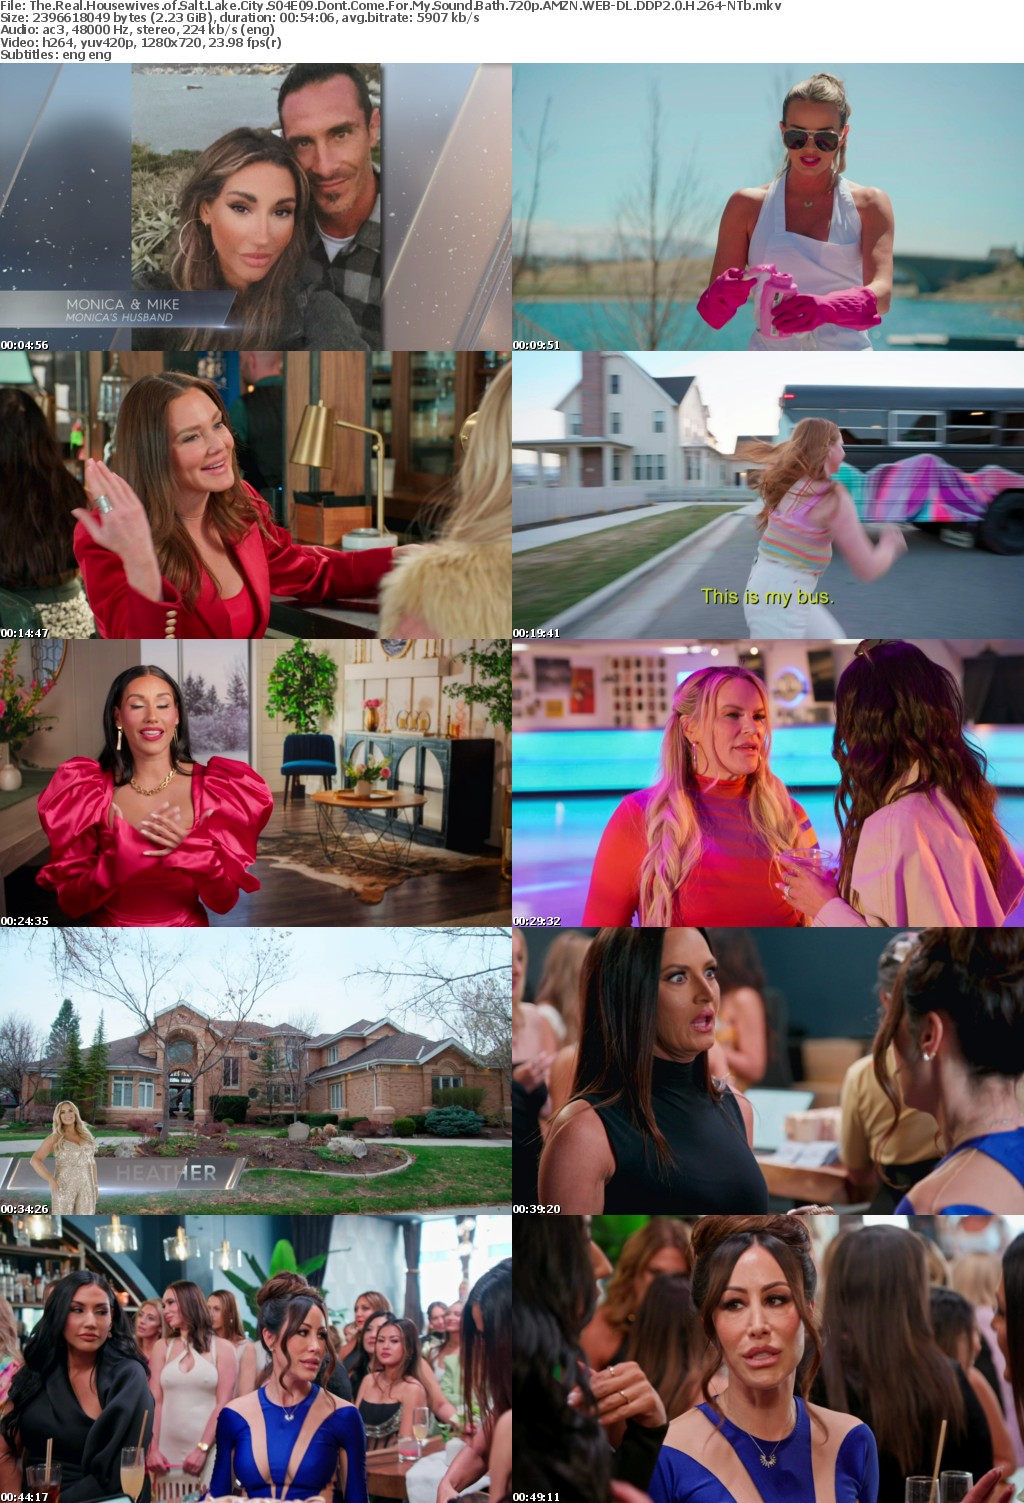 The Real Housewives of Salt Lake City S04E09 Dont Come For My Sound Bath 720p AMZN WEB-DL DDP2 0 H 264-NTb